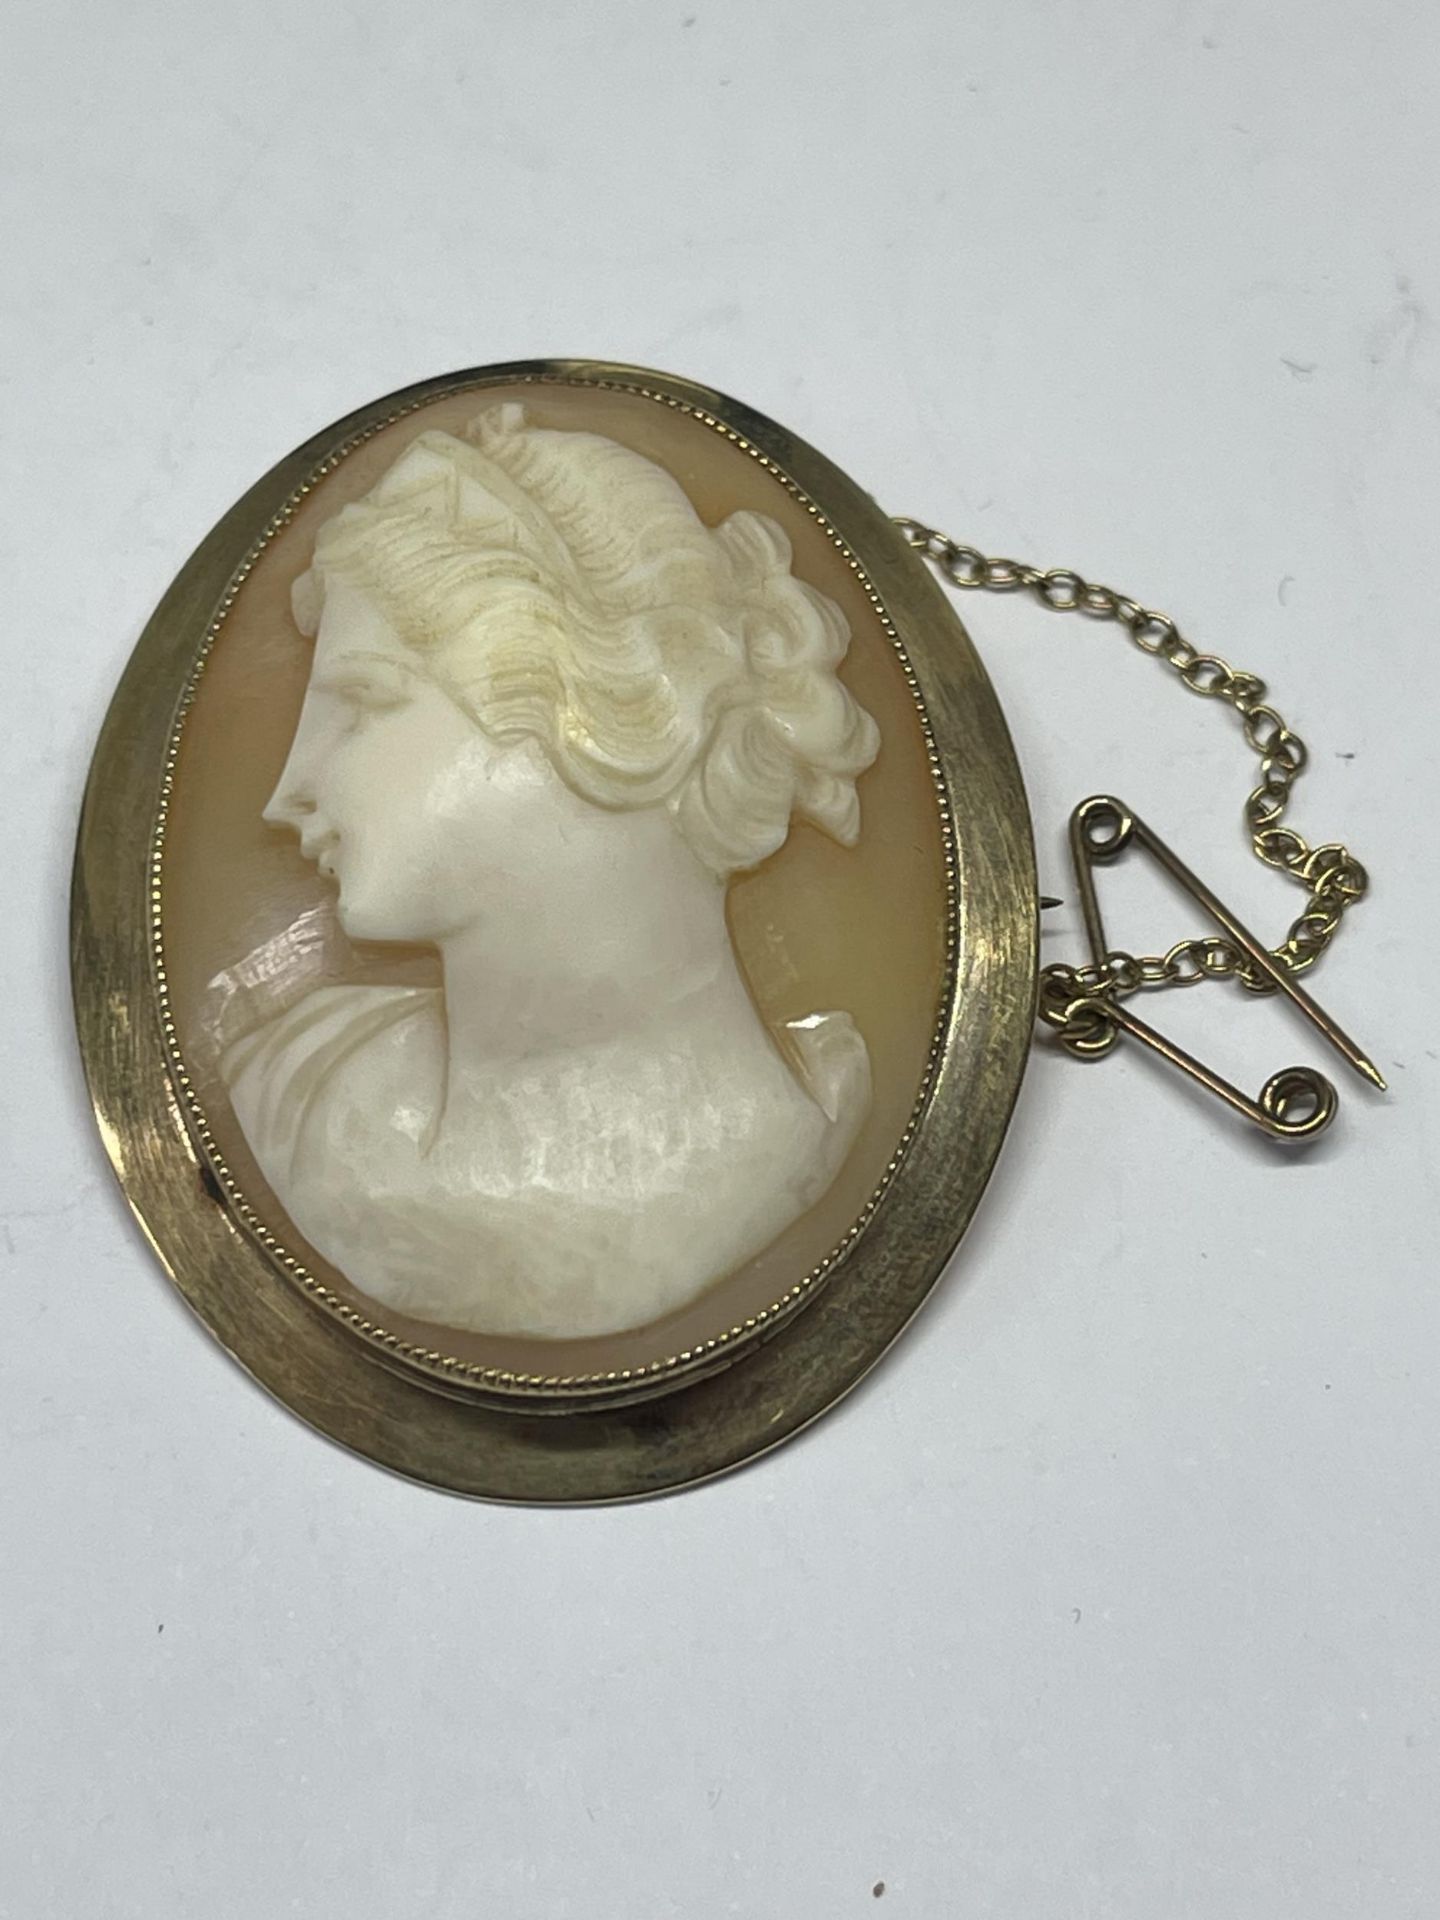 A CAMEO BROOCH WITH A 9 CARAT GOLD SURROUND GROSS WEIGHT 10.1 GRAMS WITH PRESENTATION BOX